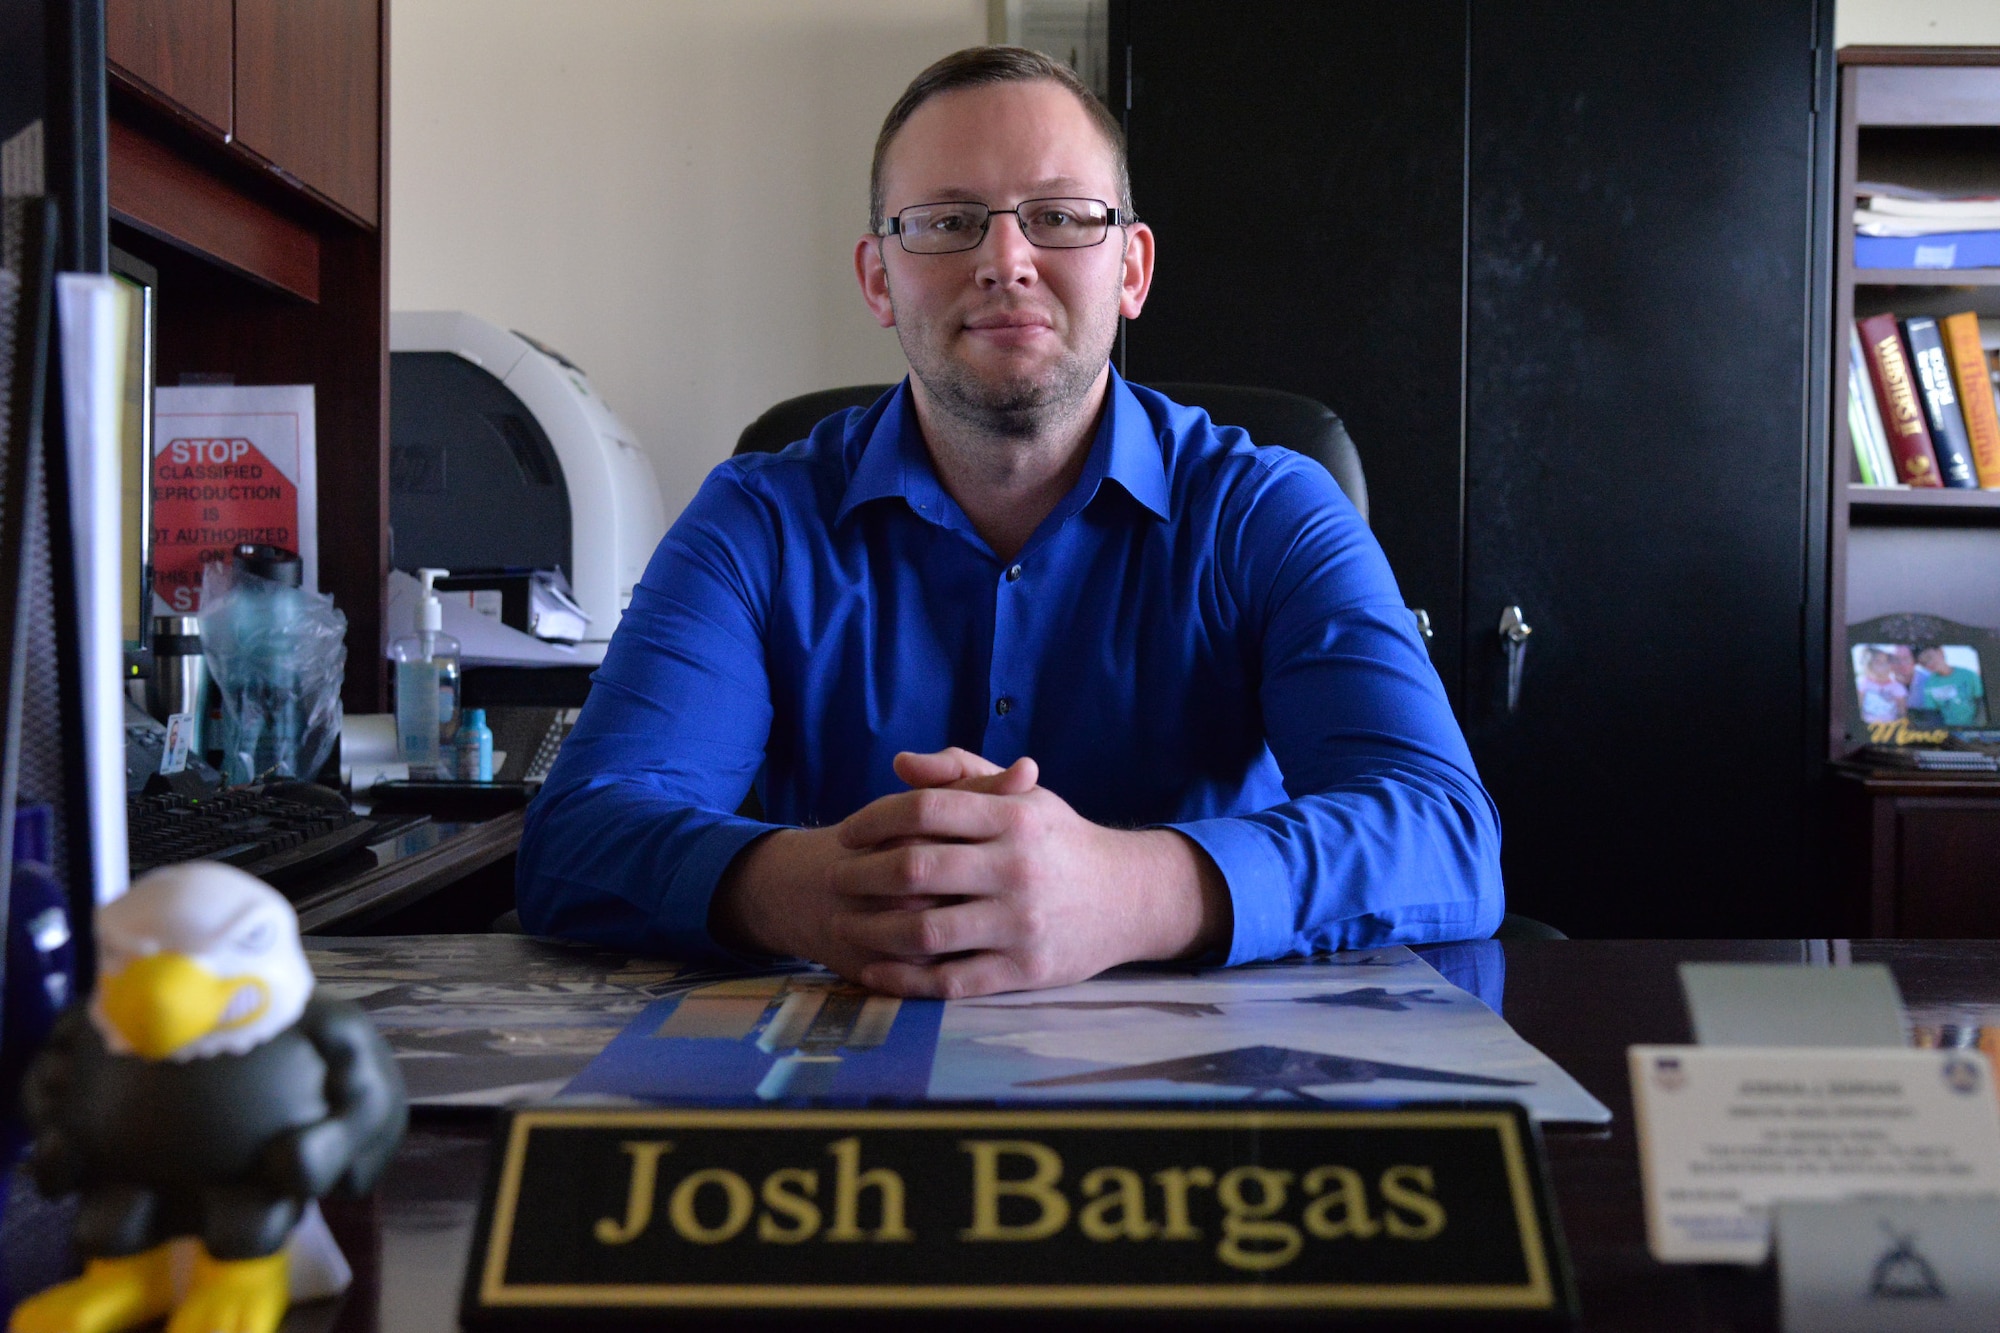 Joshua Bargas, 341st Missile Wing EO director, poses for a photo May 23, 2017, at Malmstrom Air Force Base, Mont. The Equal Opportunity office works to support a healthy environment and maintain a trusted channel for presenting allegations of unlawful discrimination based on race, color, sex, gender, national origin, religion, sexual orientation, and sexual harassment. (U.S. Air Force photo/Airman 1st Class Daniel Brosam)